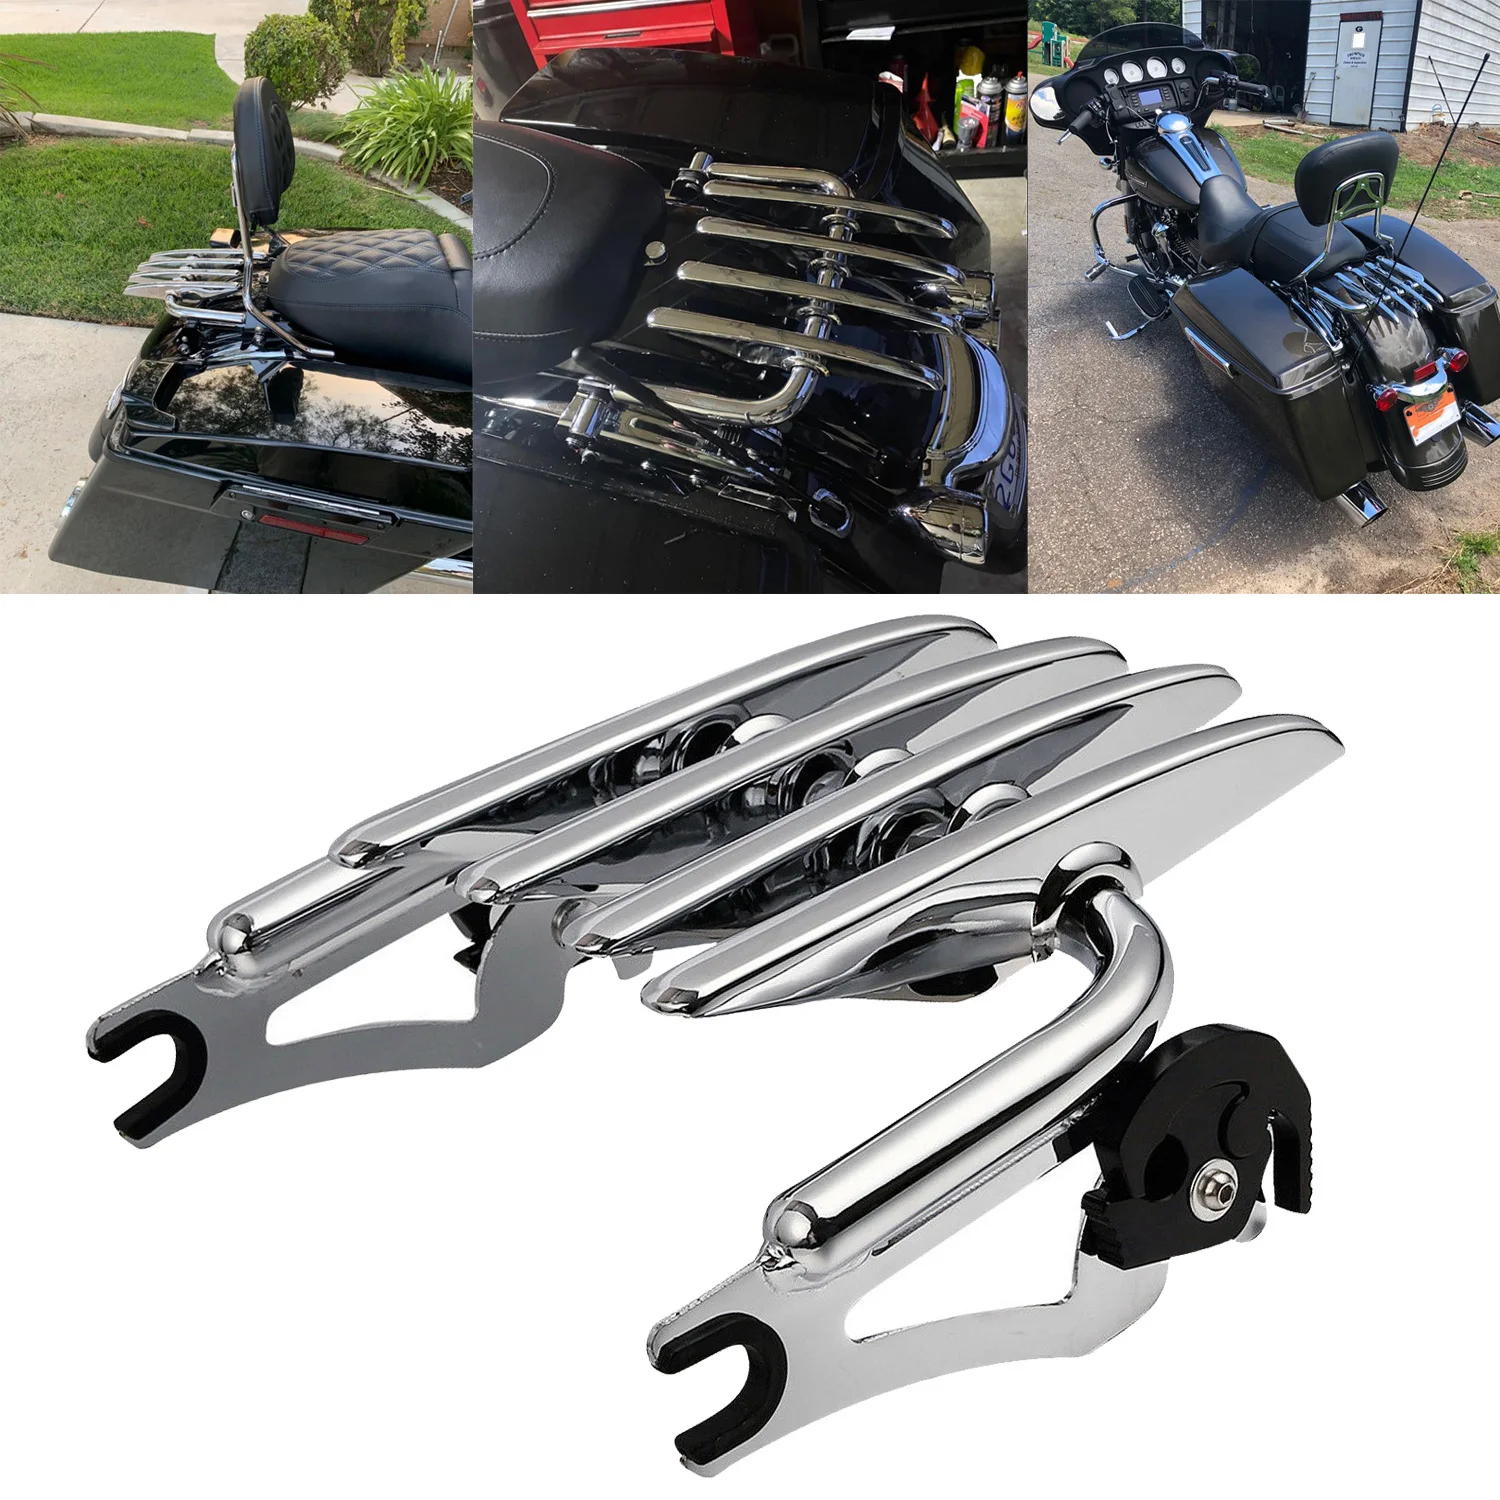 Chrome Detachable Two-Up Stealth Mounting Luggage Rack For Harley Touring Street Electra Glide Road King FLHT FLHX 2009-2023 motorcycle front fork boot slider cover aluminum black chrome for harley touring street electra glide flhr flht fltr 1997 2016